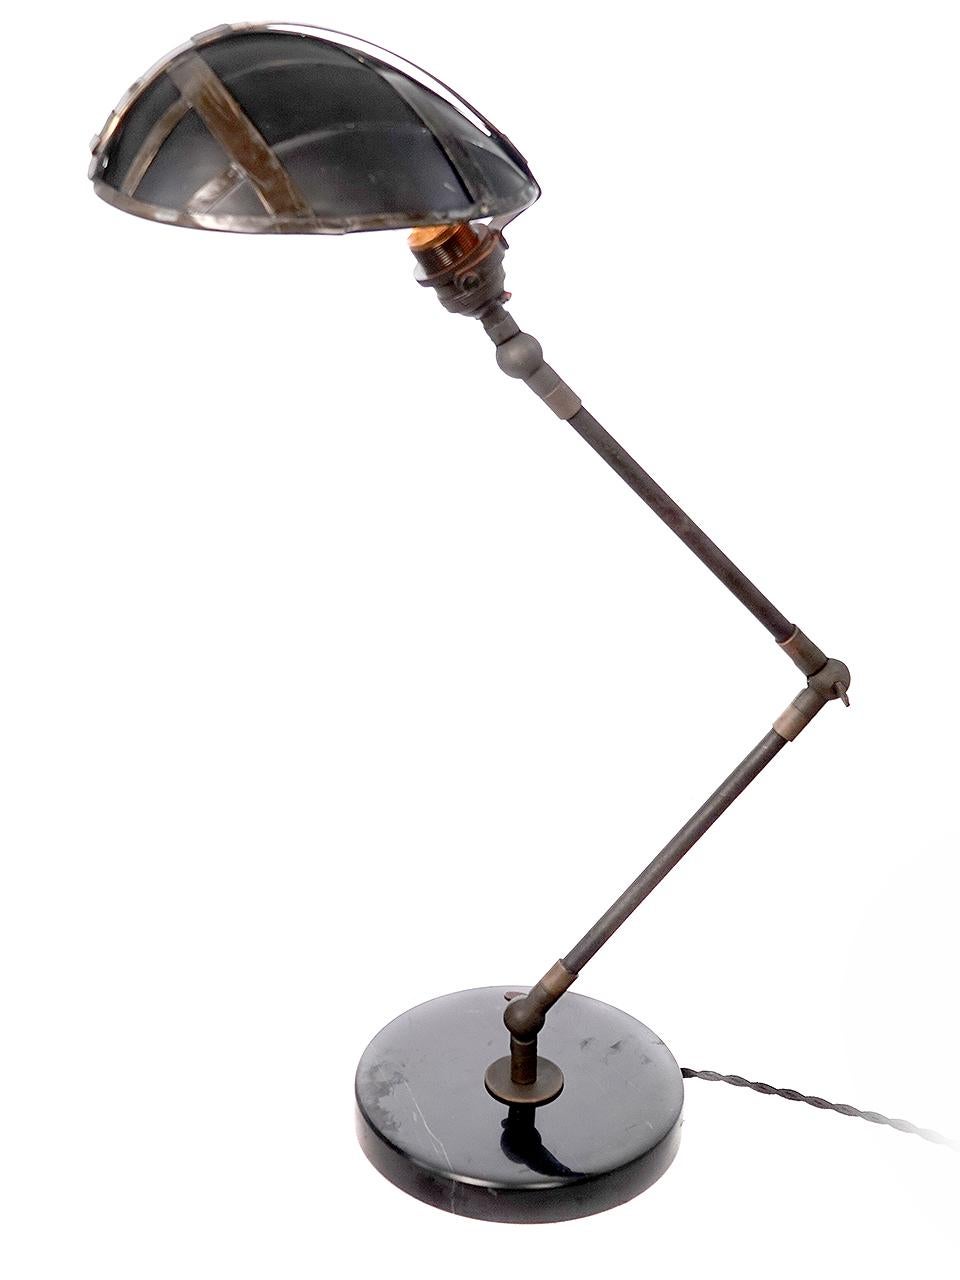 American Unique Banded Mirror Articulating Desk Lamp For Sale